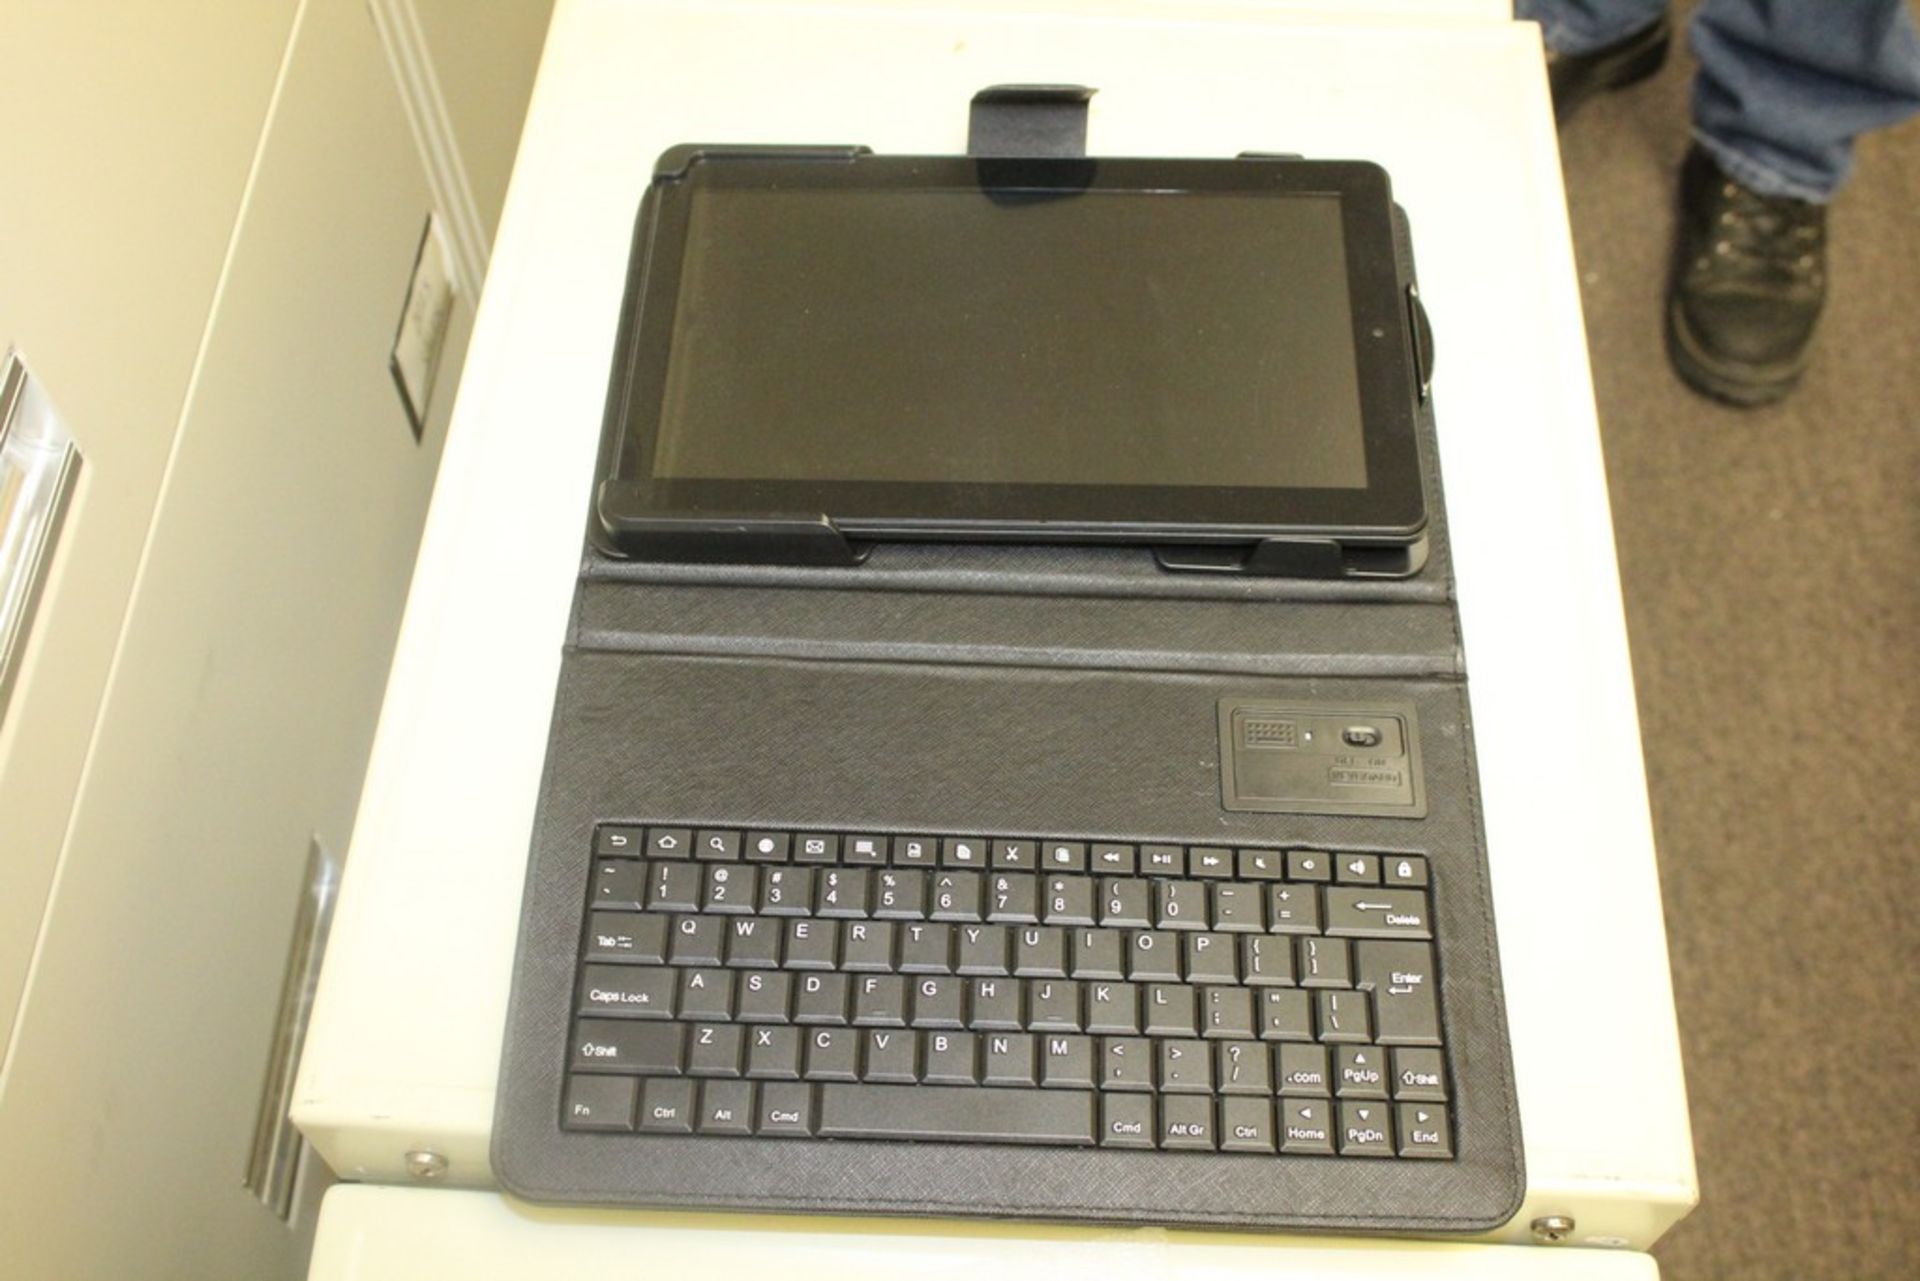 ELECTRO BRAND MODEL RKT6773W22K8 10" TABLET WITH KEYBOARD AND CARRYING CASE